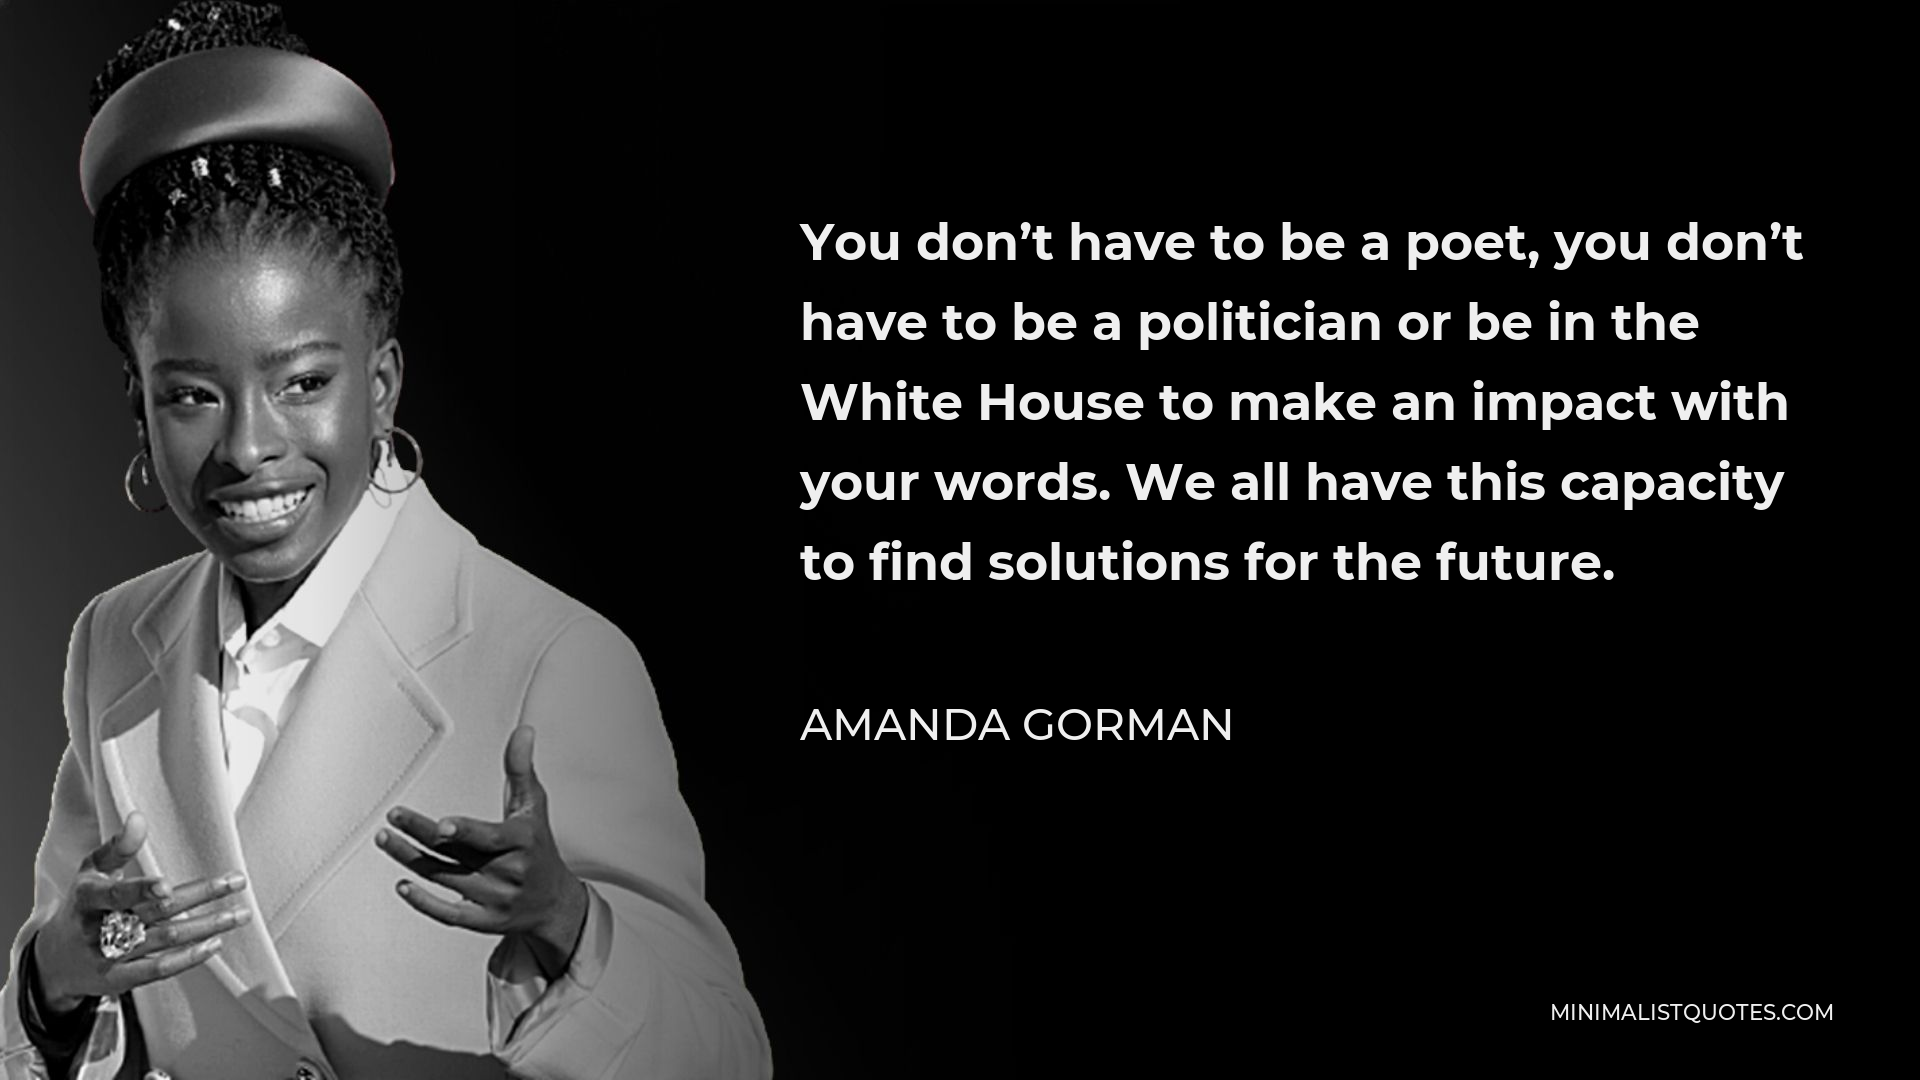 Amanda Gorman Quote - You don’t have to be a poet, you don’t have to be a politician or be in the White House to make an impact with your words. We all have this capacity to find solutions for the future.